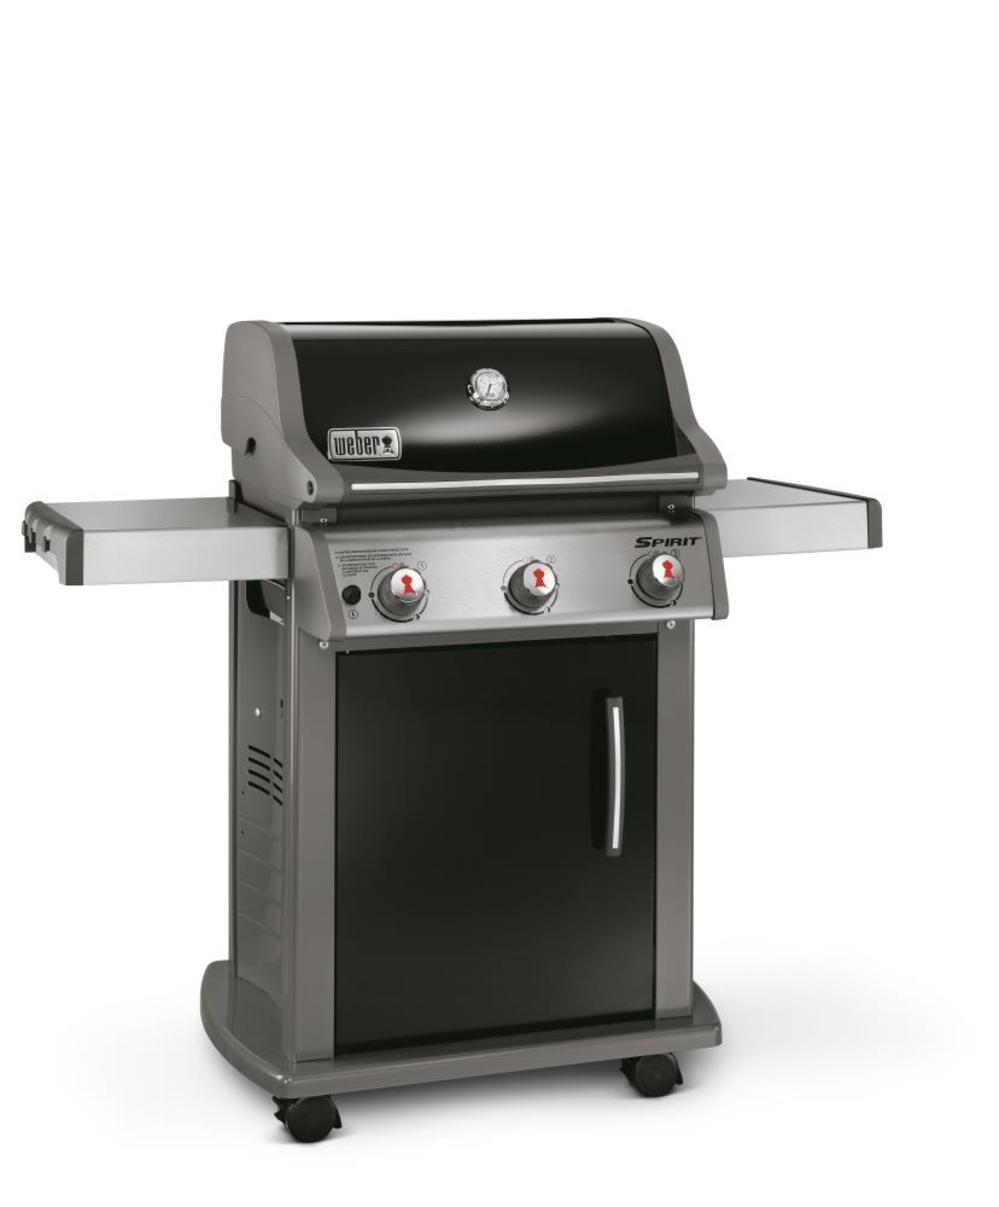 E-310 3 LP Black Grill from Weber - Acme Tools